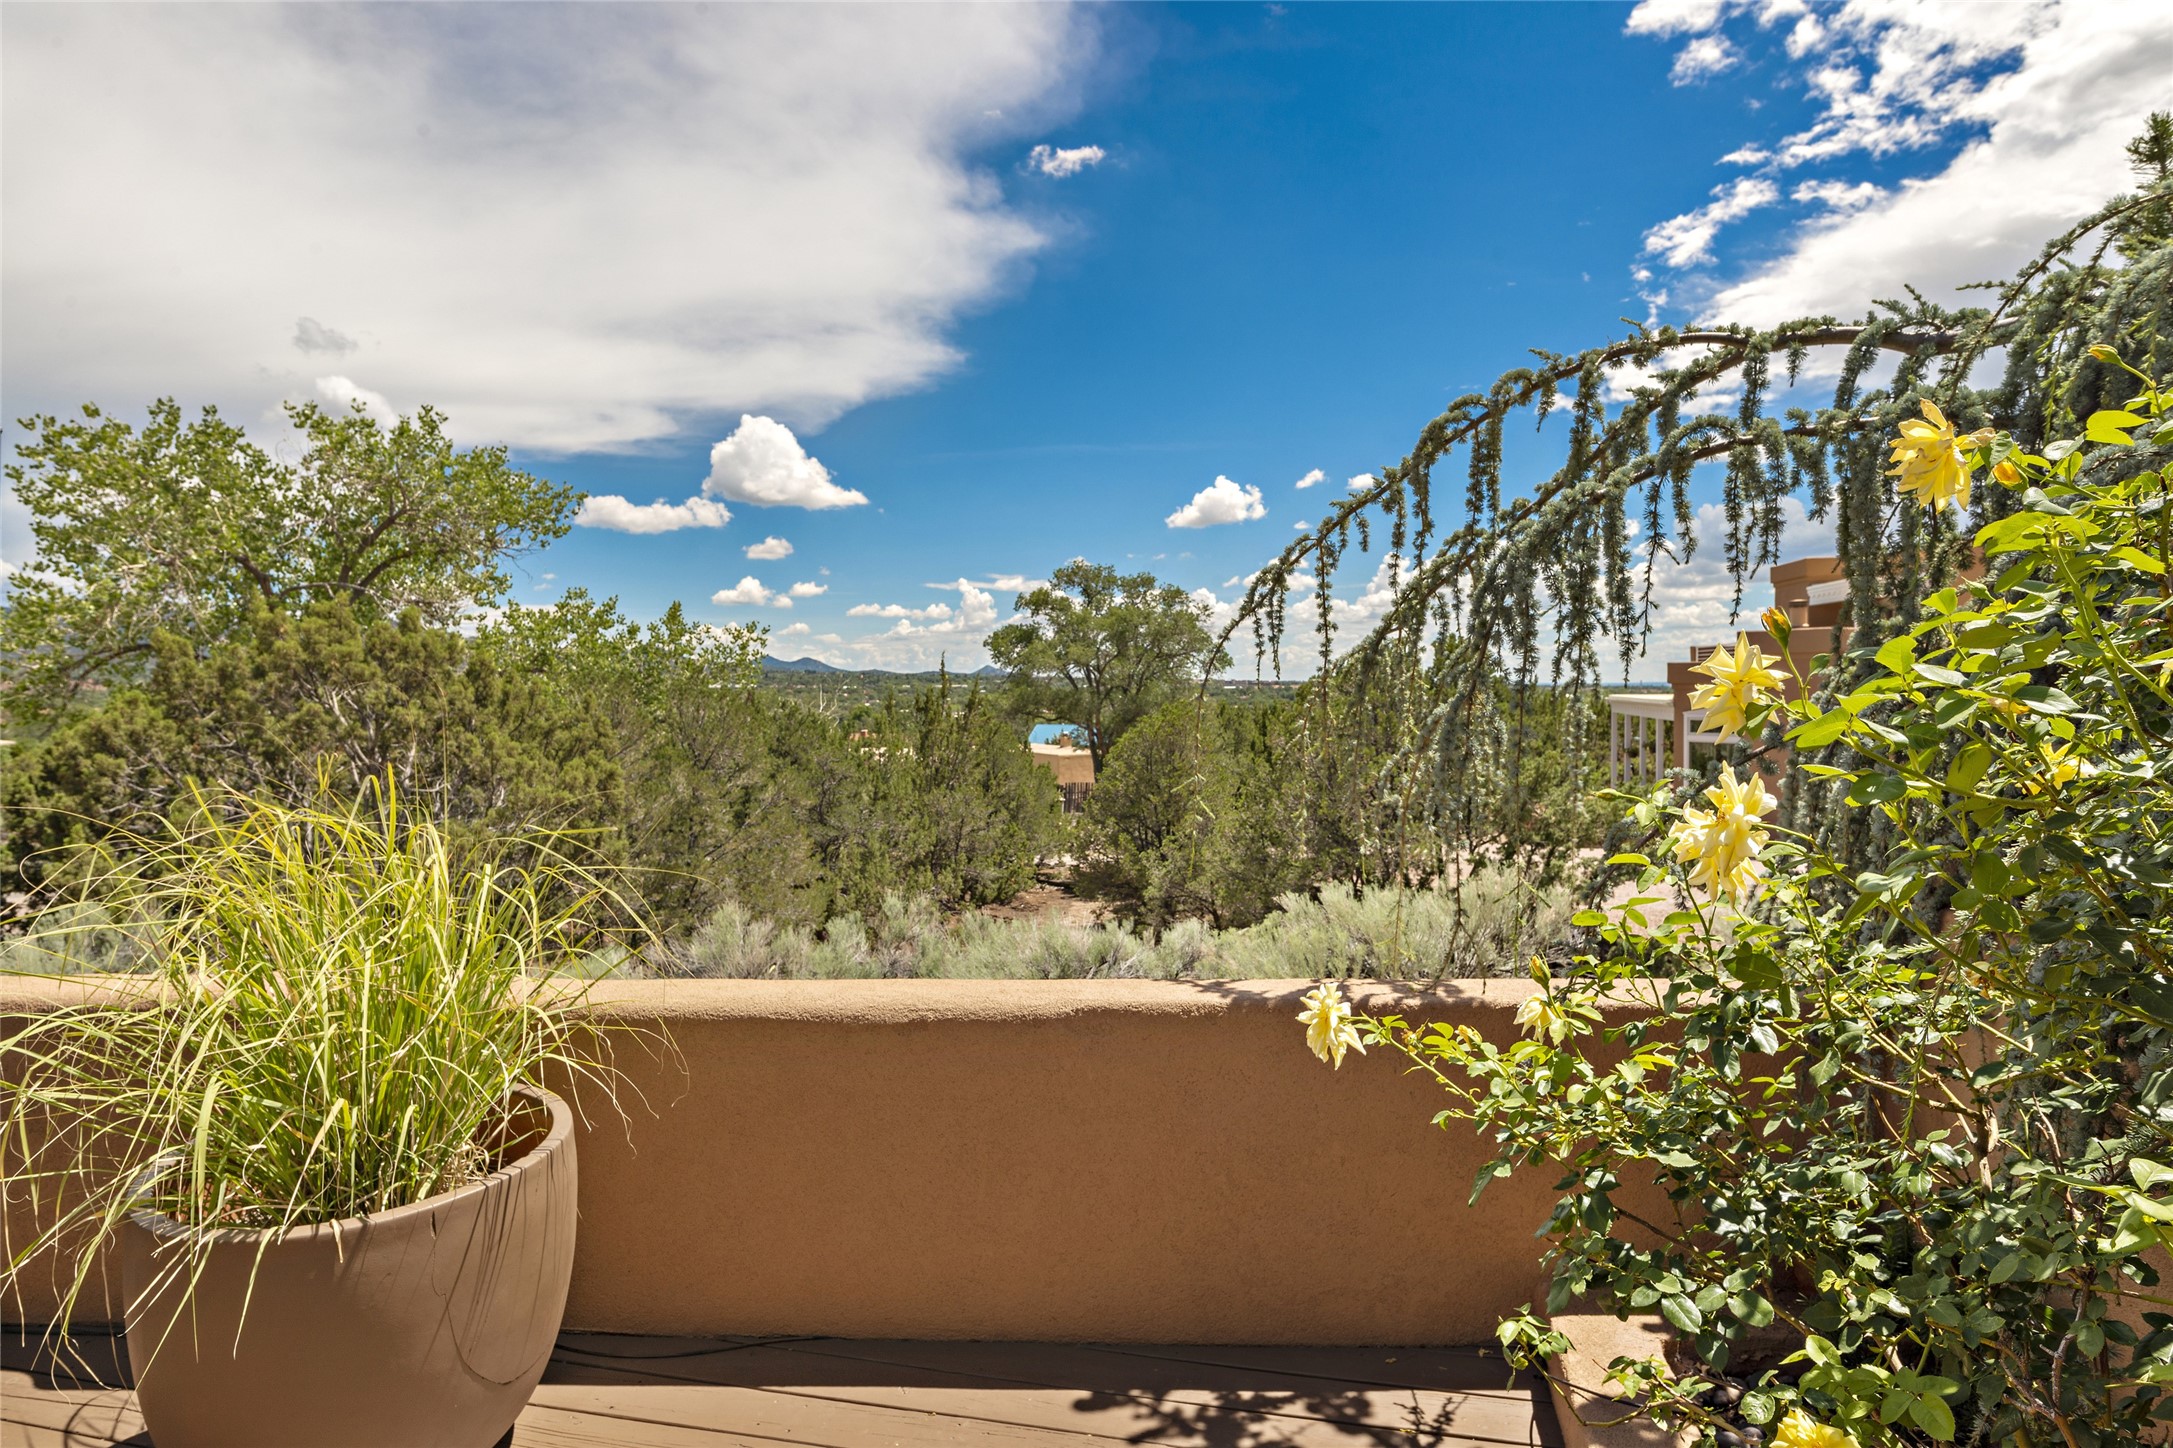 113 Michelle Drive, Santa Fe, New Mexico 87501, 2 Bedrooms Bedrooms, ,2 BathroomsBathrooms,Residential,For Sale,113 Michelle Drive,202232295